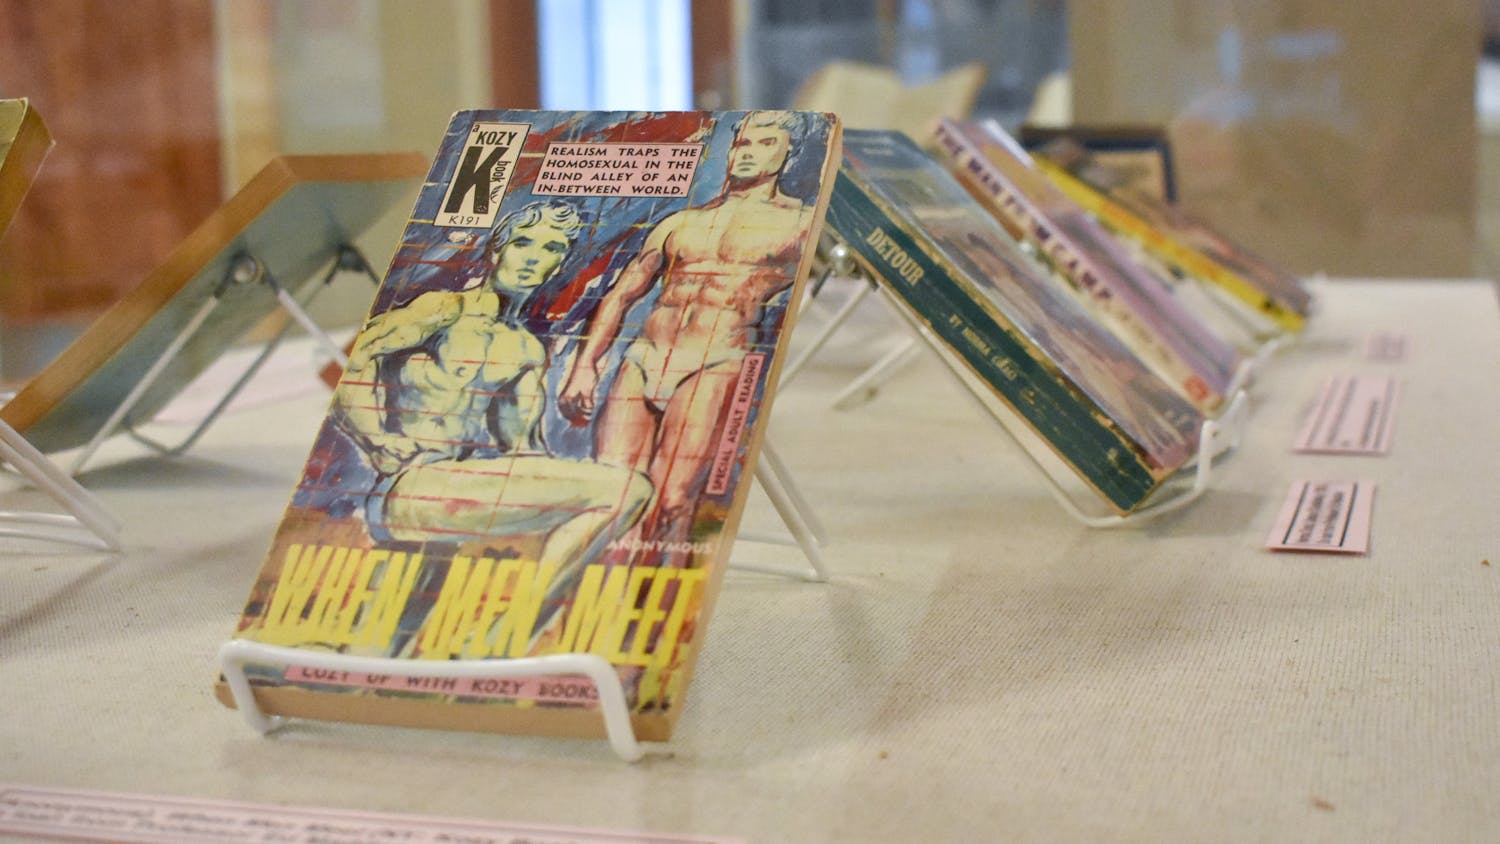 The book "When Men Meet" is displayed alongside other books highlighting queer identities in the “To tell the secret of my nights and days” exhibit. The collection of books, newspapers, photos and magazines in the Thomas Cooper Library is open until January 2024.